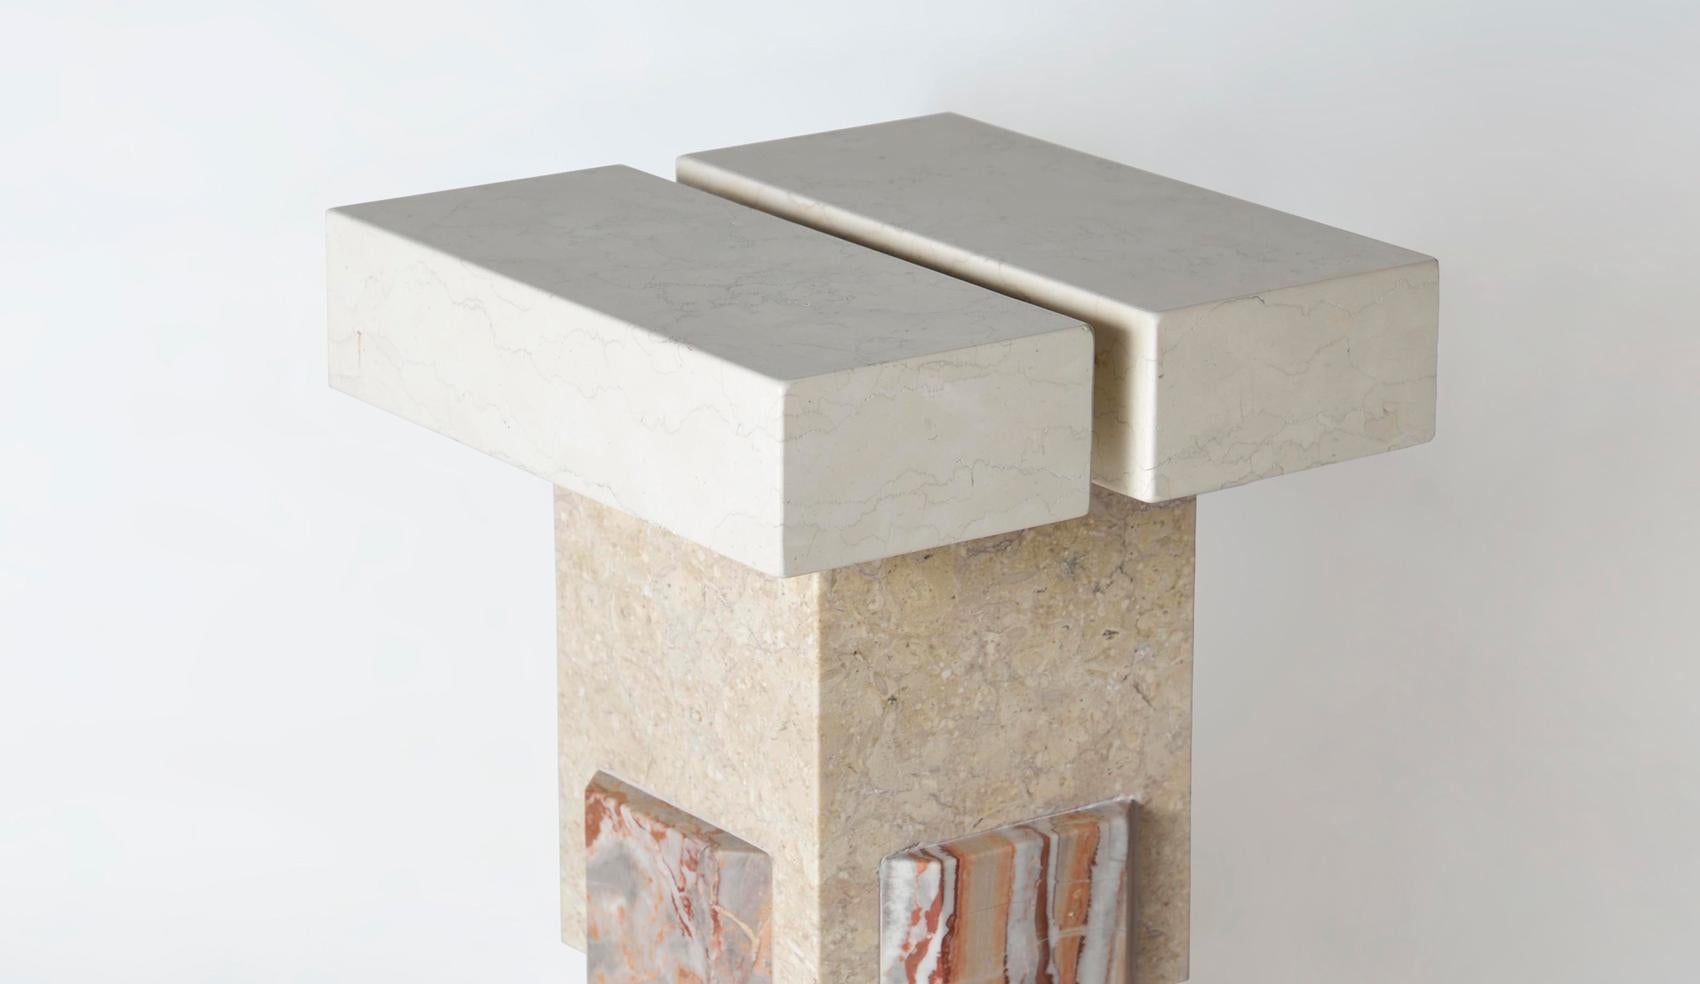 Kapital is a series of limited edition tables and stools based on essential forms, reminiscent of primordial stone capitals and simple geometric assemblages commonly found in classical architecture. The distinct and characteristic profiles,